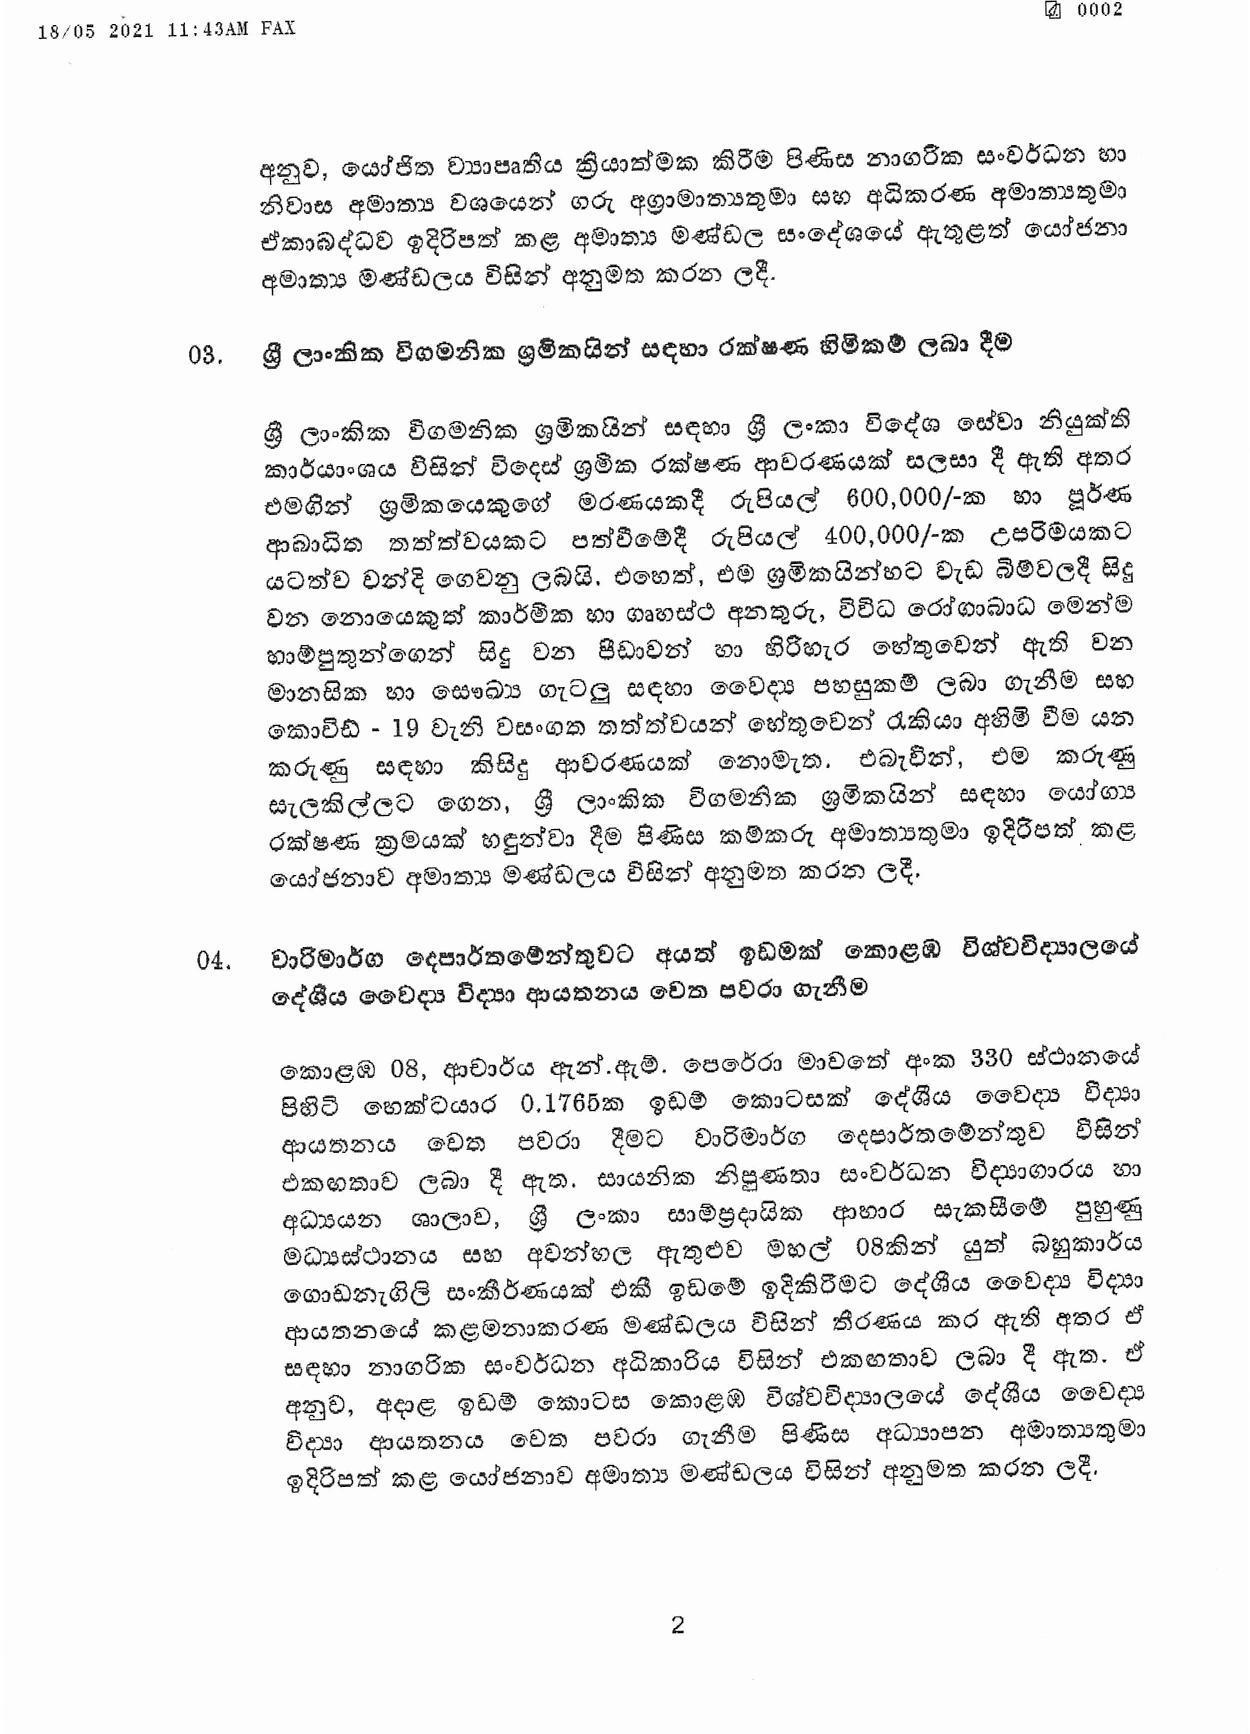 Cabinet Decision on 17.05.2021 page 002